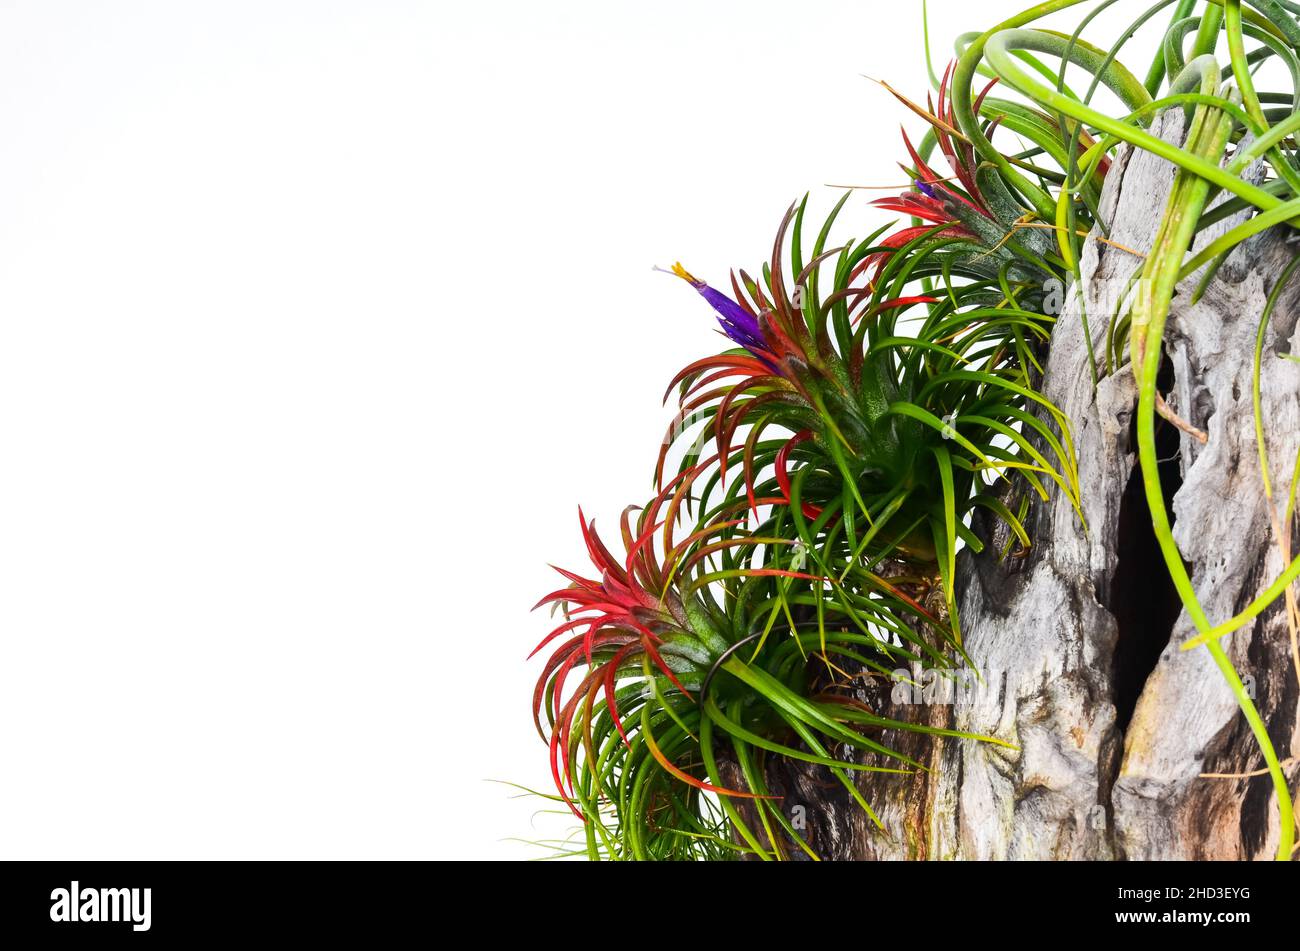 Blooming air plant - Tillandsia with red color flowers plant in wooden log on white background. Stock Photo